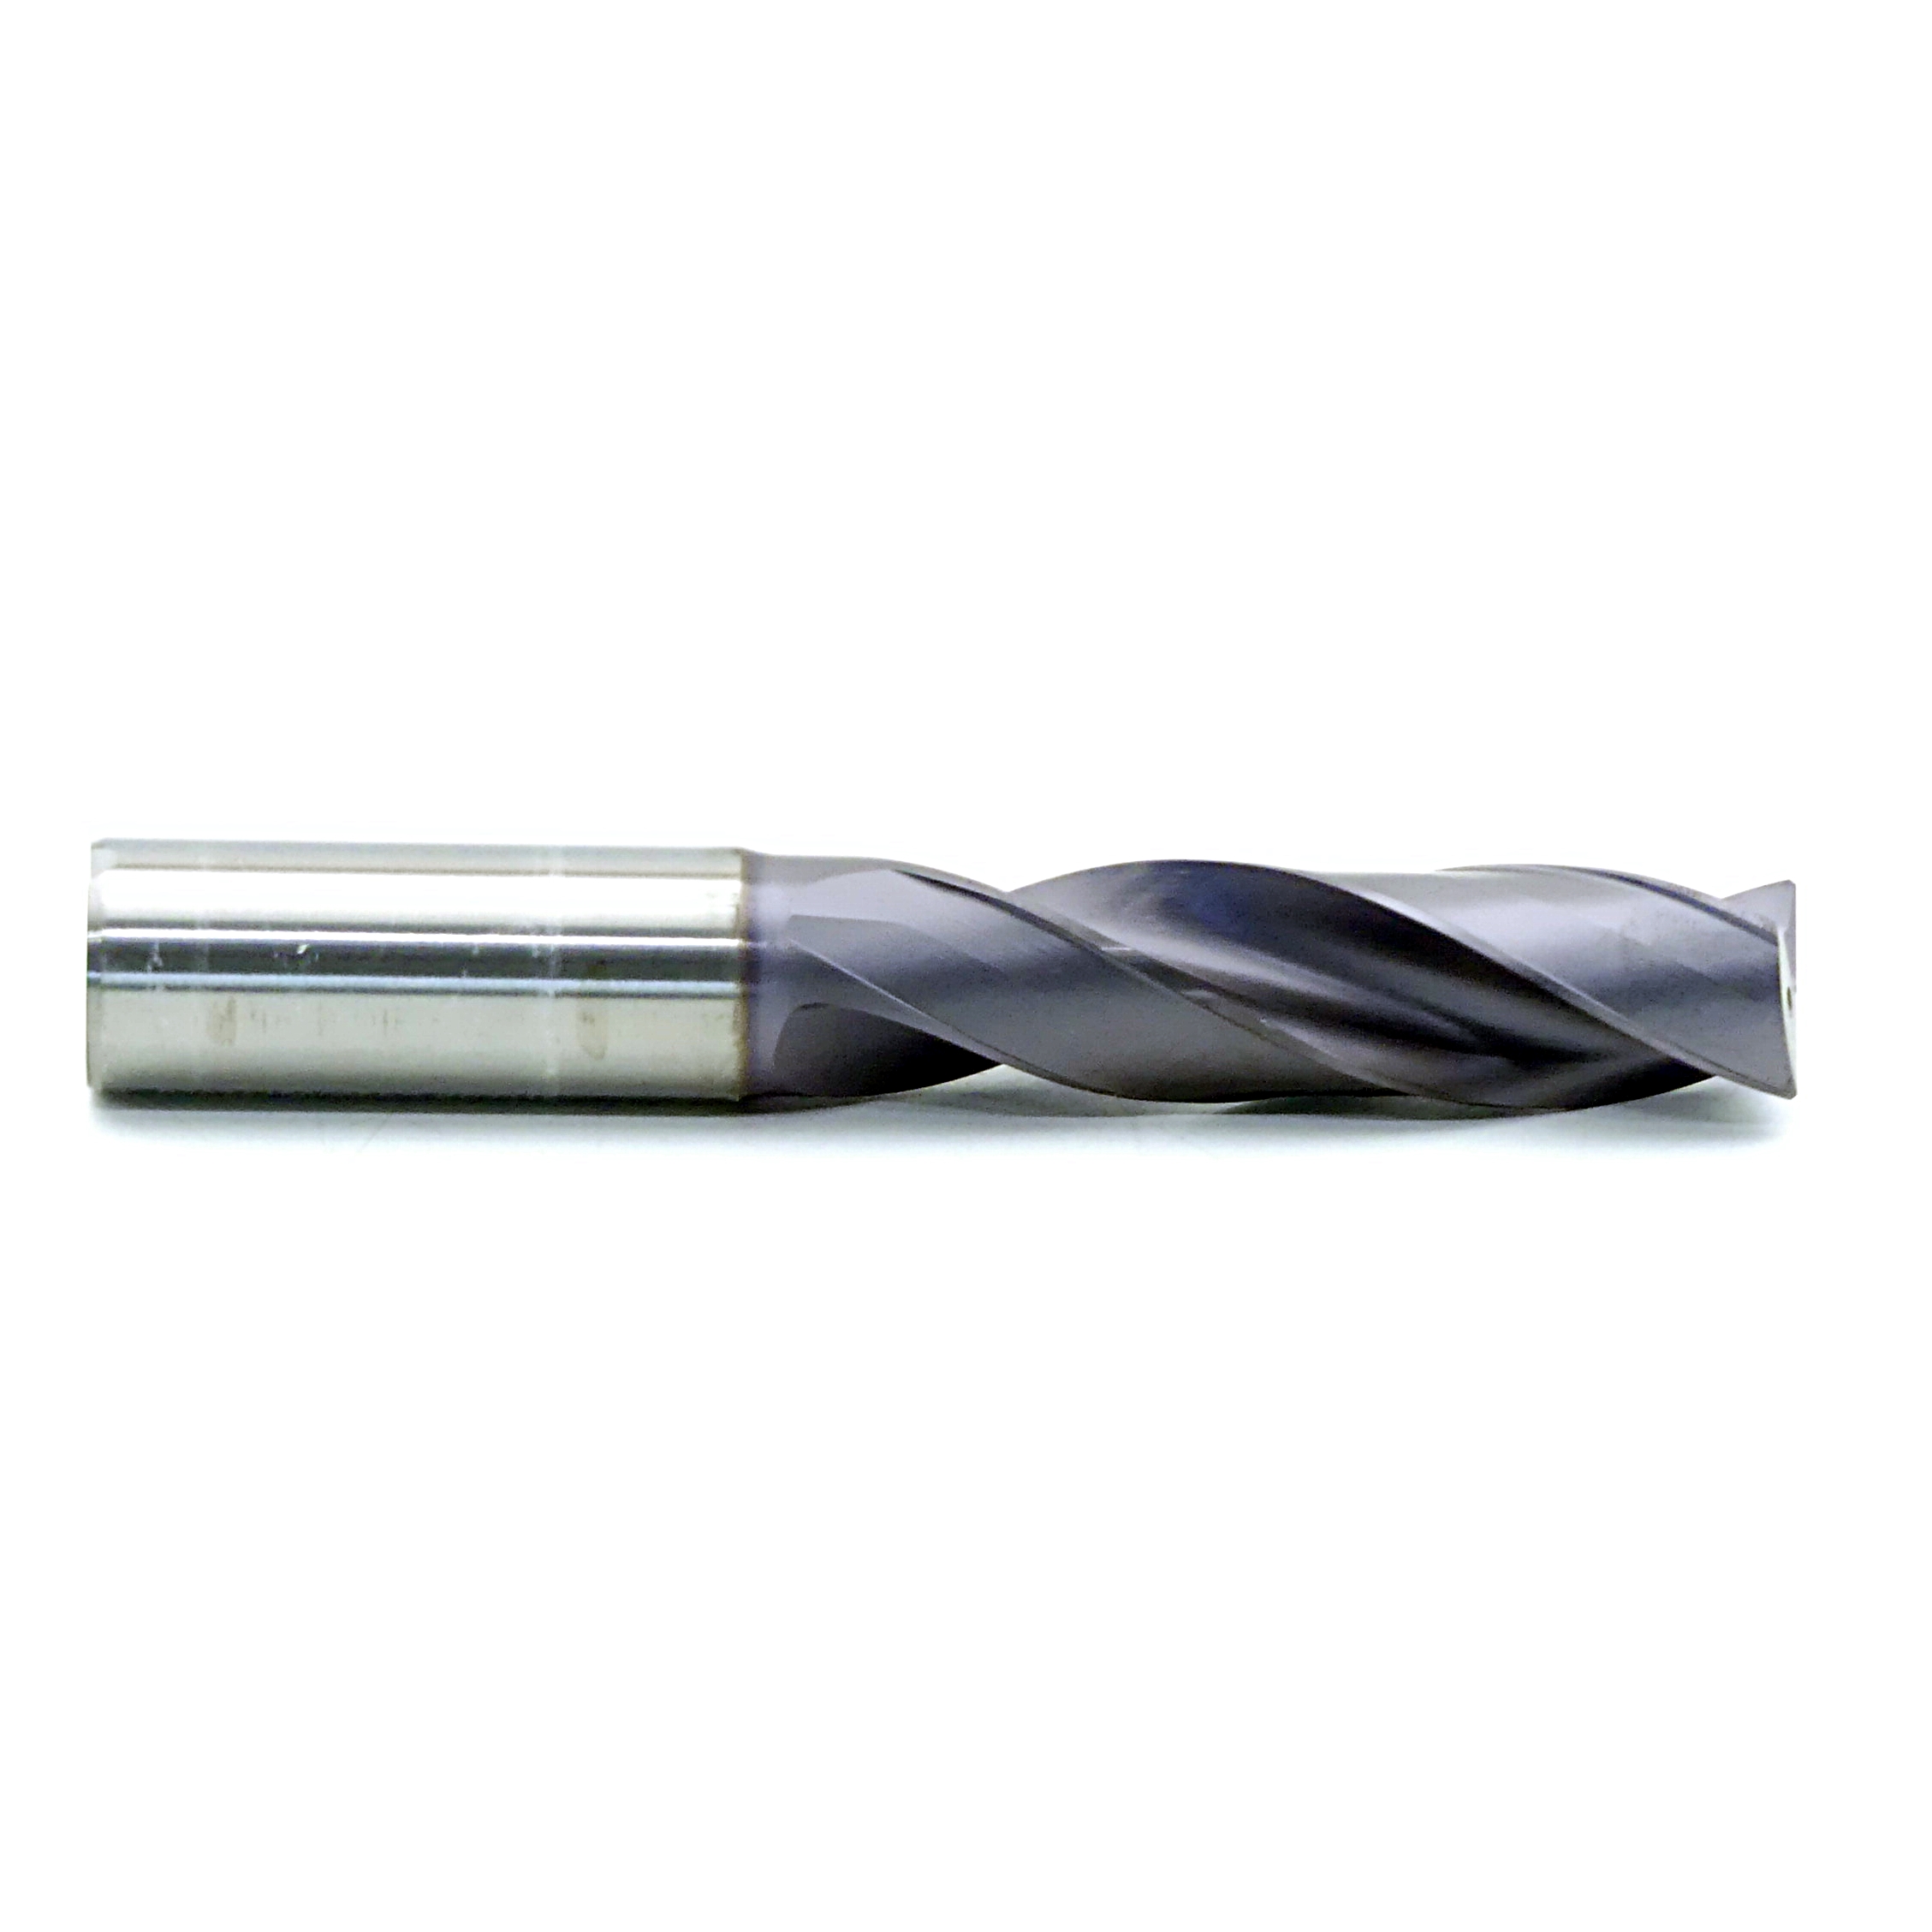 Solid Carbide drill KC7315 